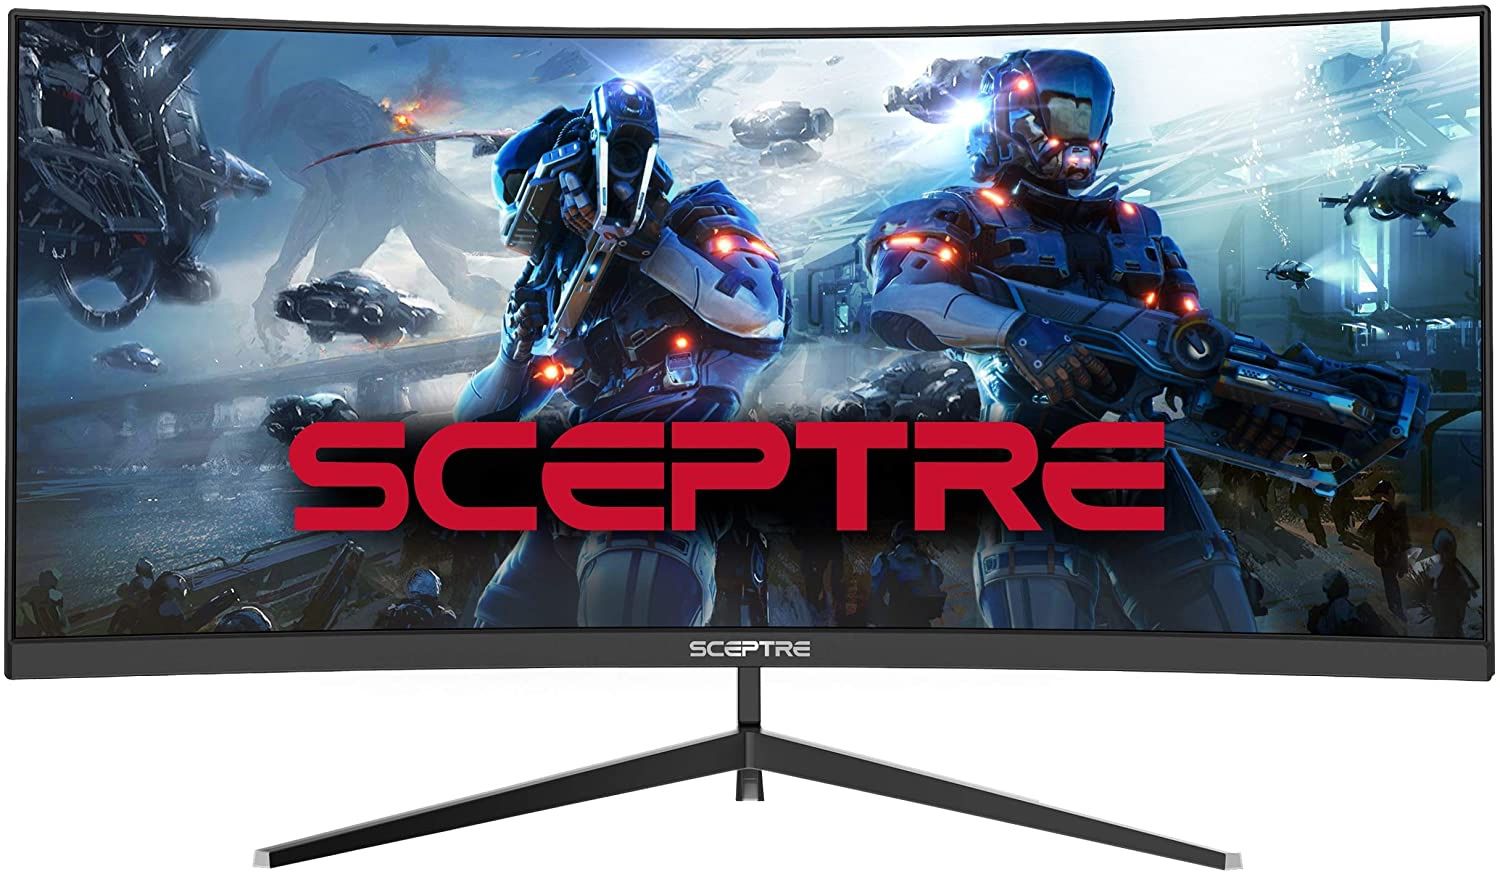 Used Sceptre 30-inch Curved Gaming Monitor 21:9 2560x1080 Ultra Wide Ultra Slim HDMI DisplayPort up to 200Hz Build-in Speakers, Metal Black